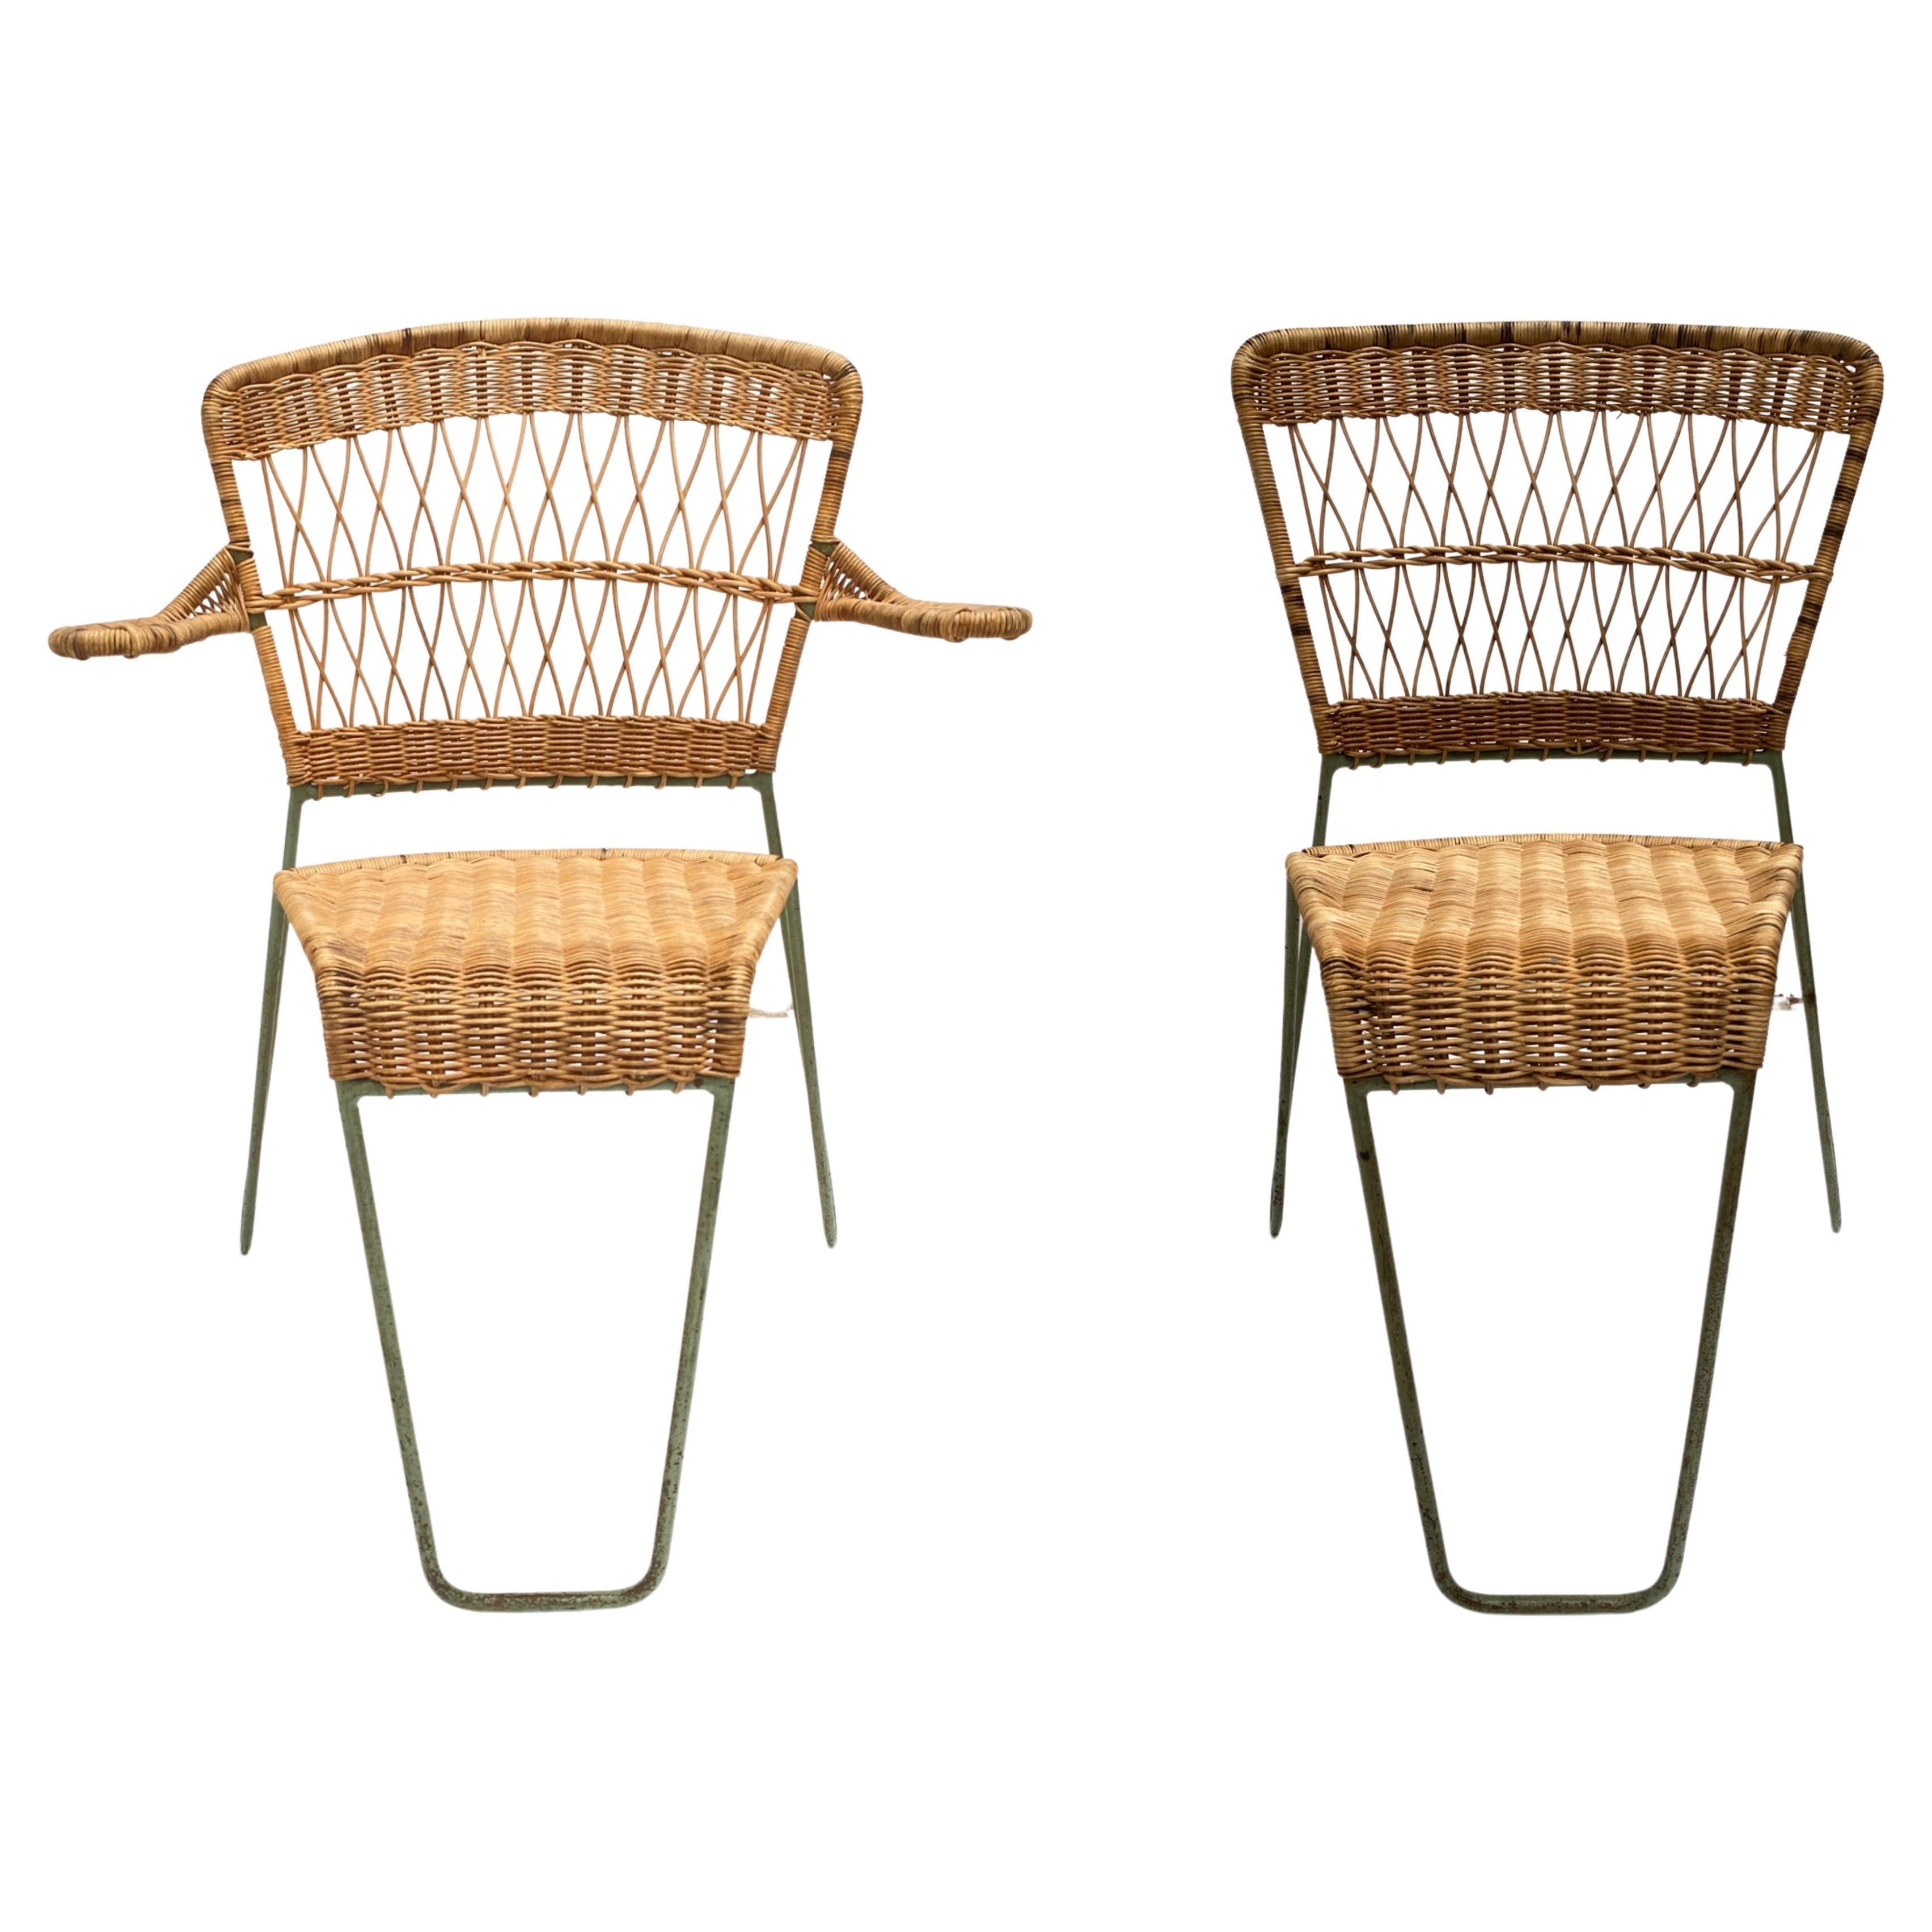 Mid-20th Century 3 Sculptural Form 'Oro' Dining Chairs by Raoul Guys, 1951, Airborne, France For Sale